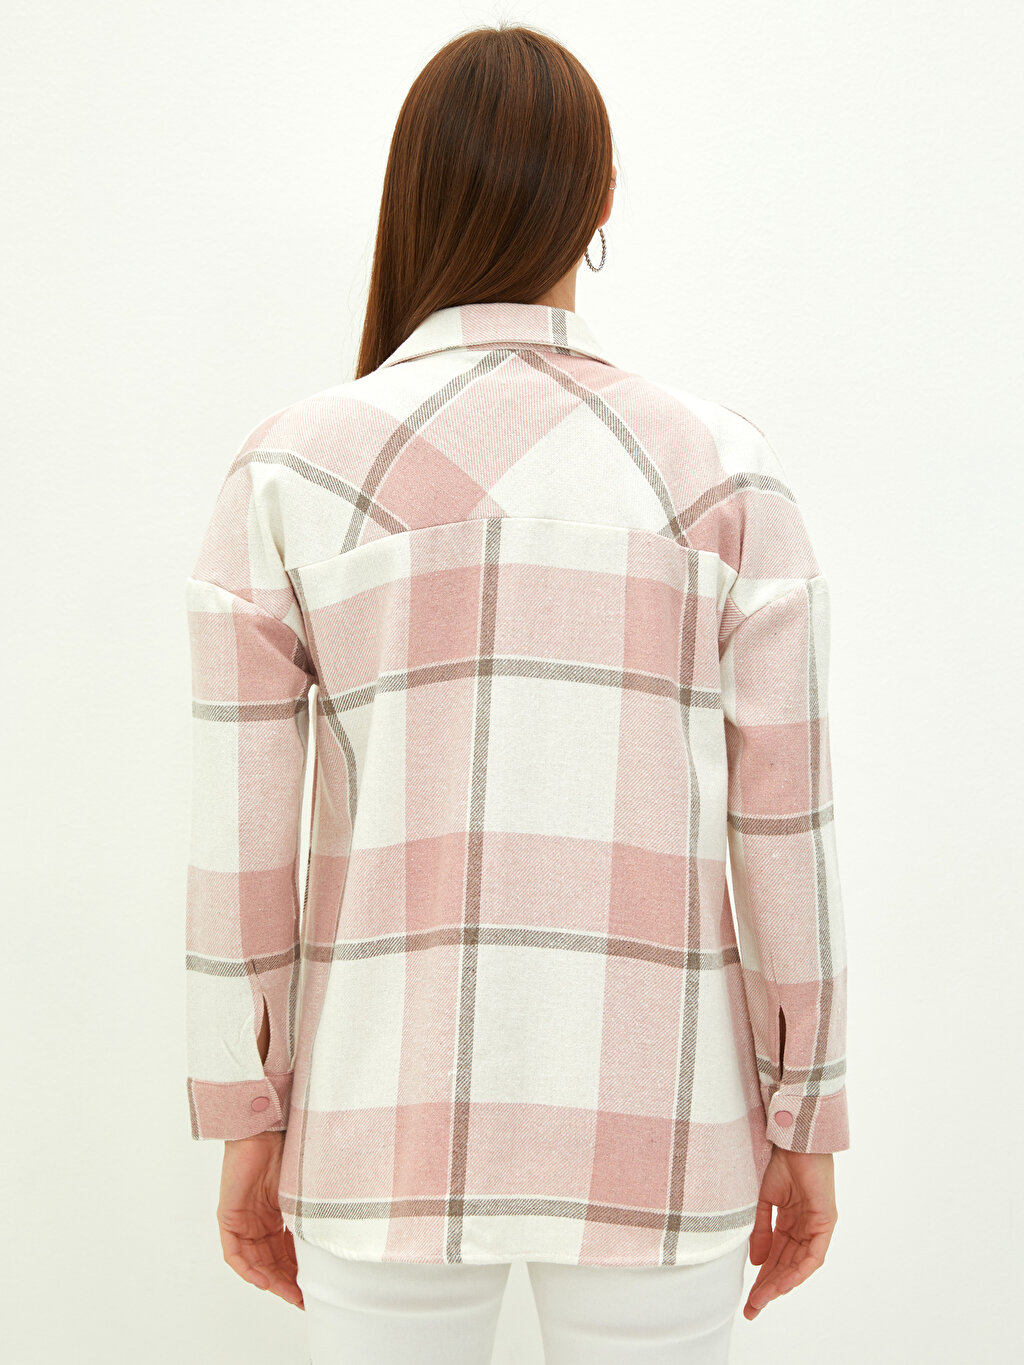 Front Button Closure Pocket Detailed Long Sleeve Plaid Maternity Shirt  -W1BY63Z8-LNQ - W1BY63Z8-LNQ - LC Waikiki